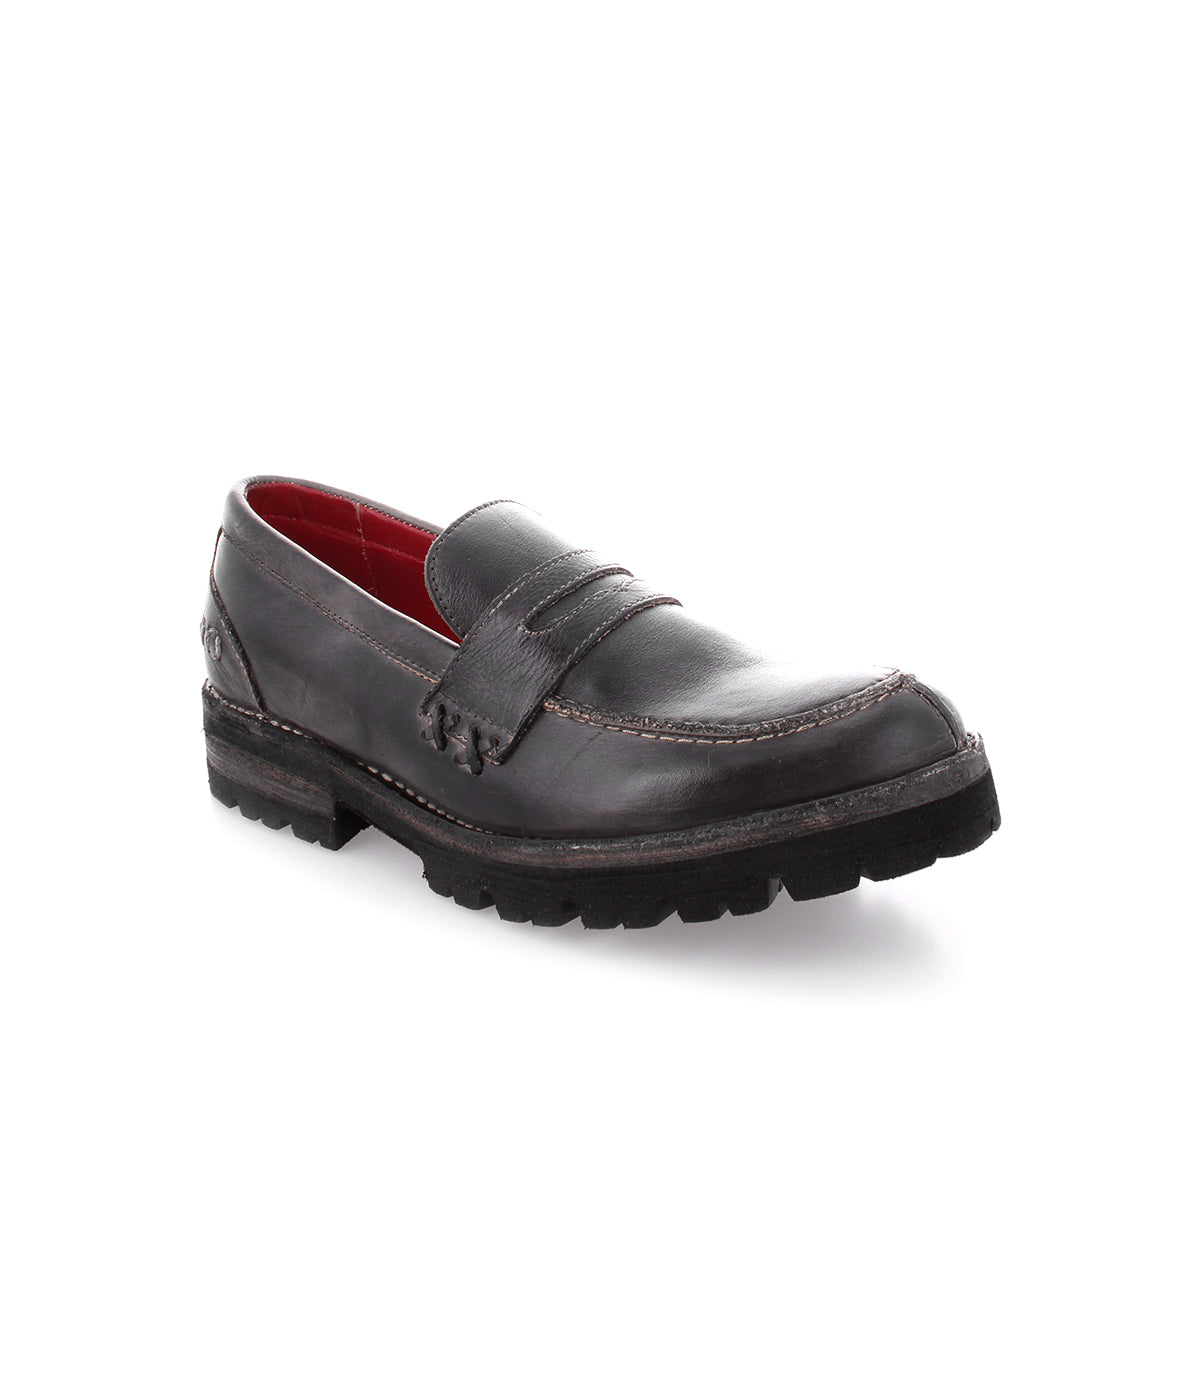 A women's black Reina III loafer with a black sole.